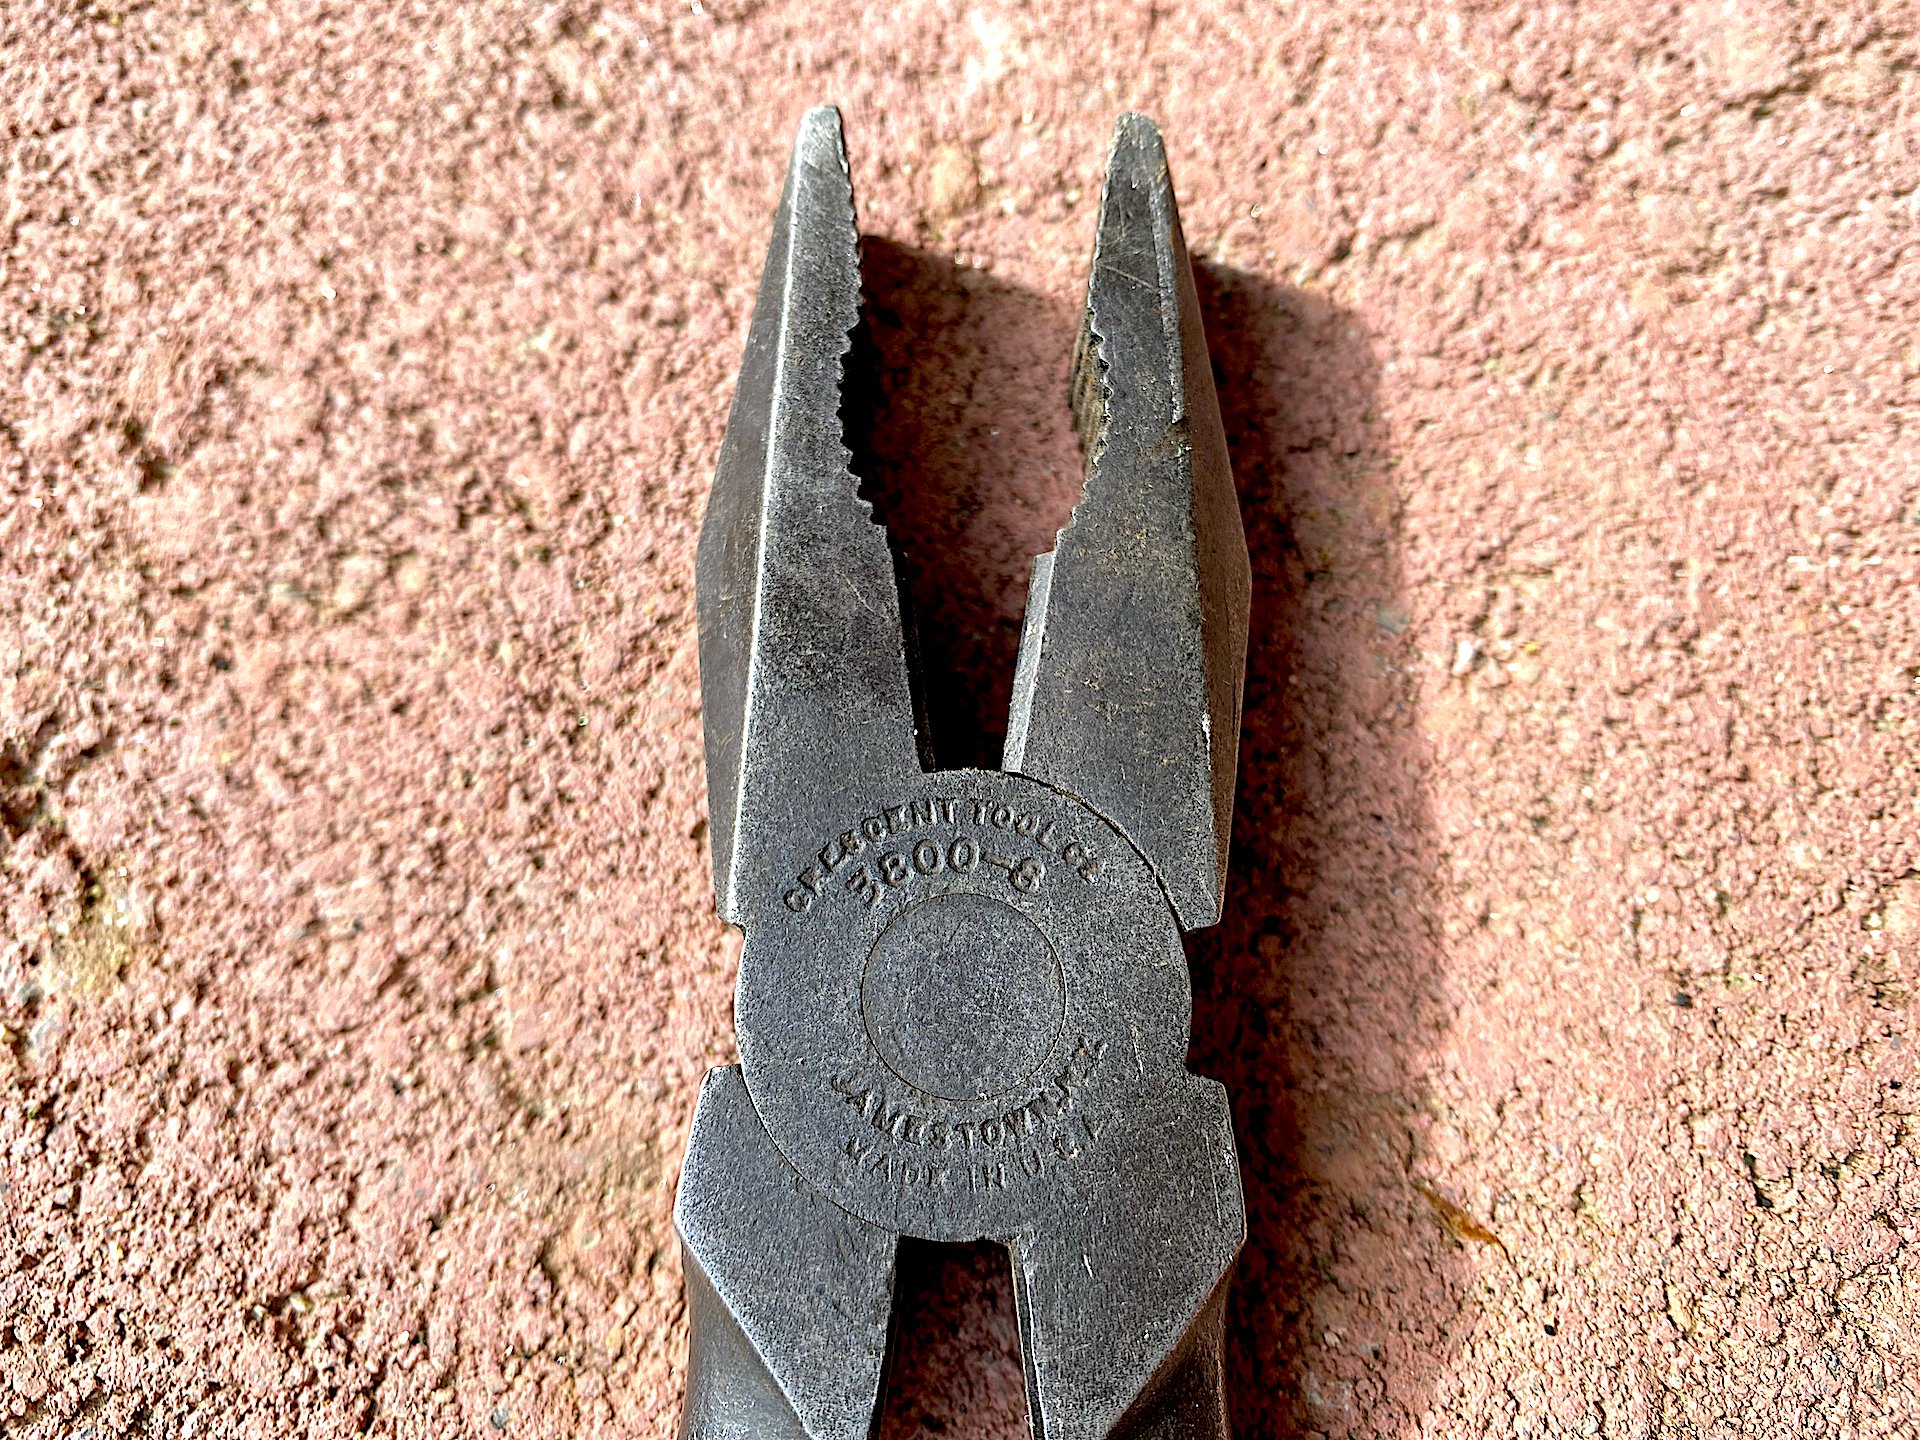 Ox End Cutting Pliers